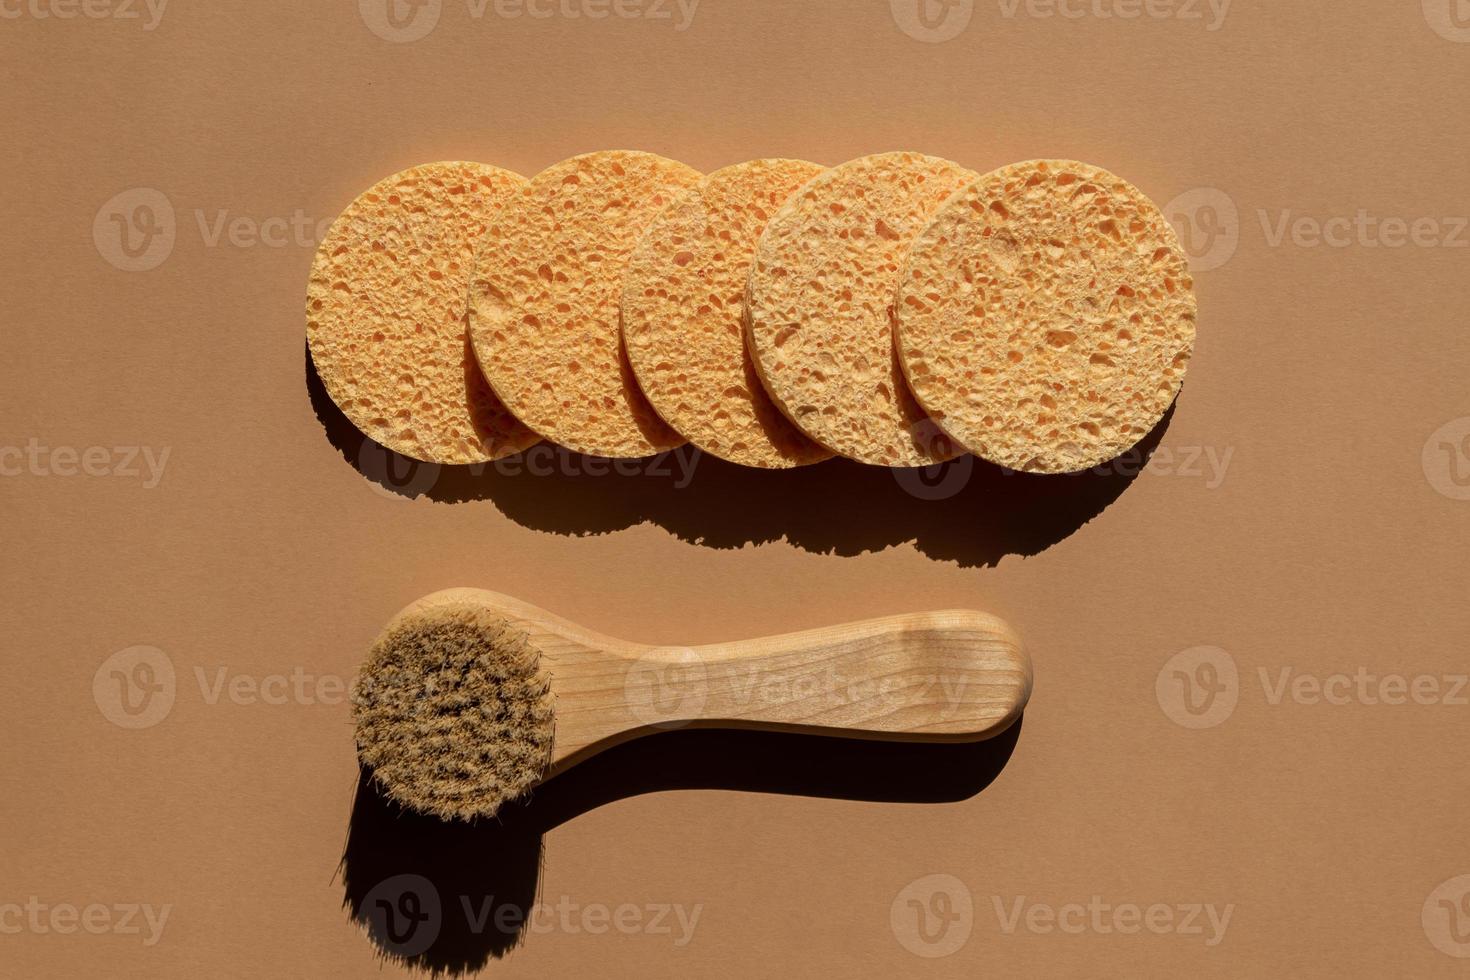 Shower accessories - face brush with natural bristle and round cellulose sponges on a brown background, top view. Cleansing of the skin health concept. Flat lay photo